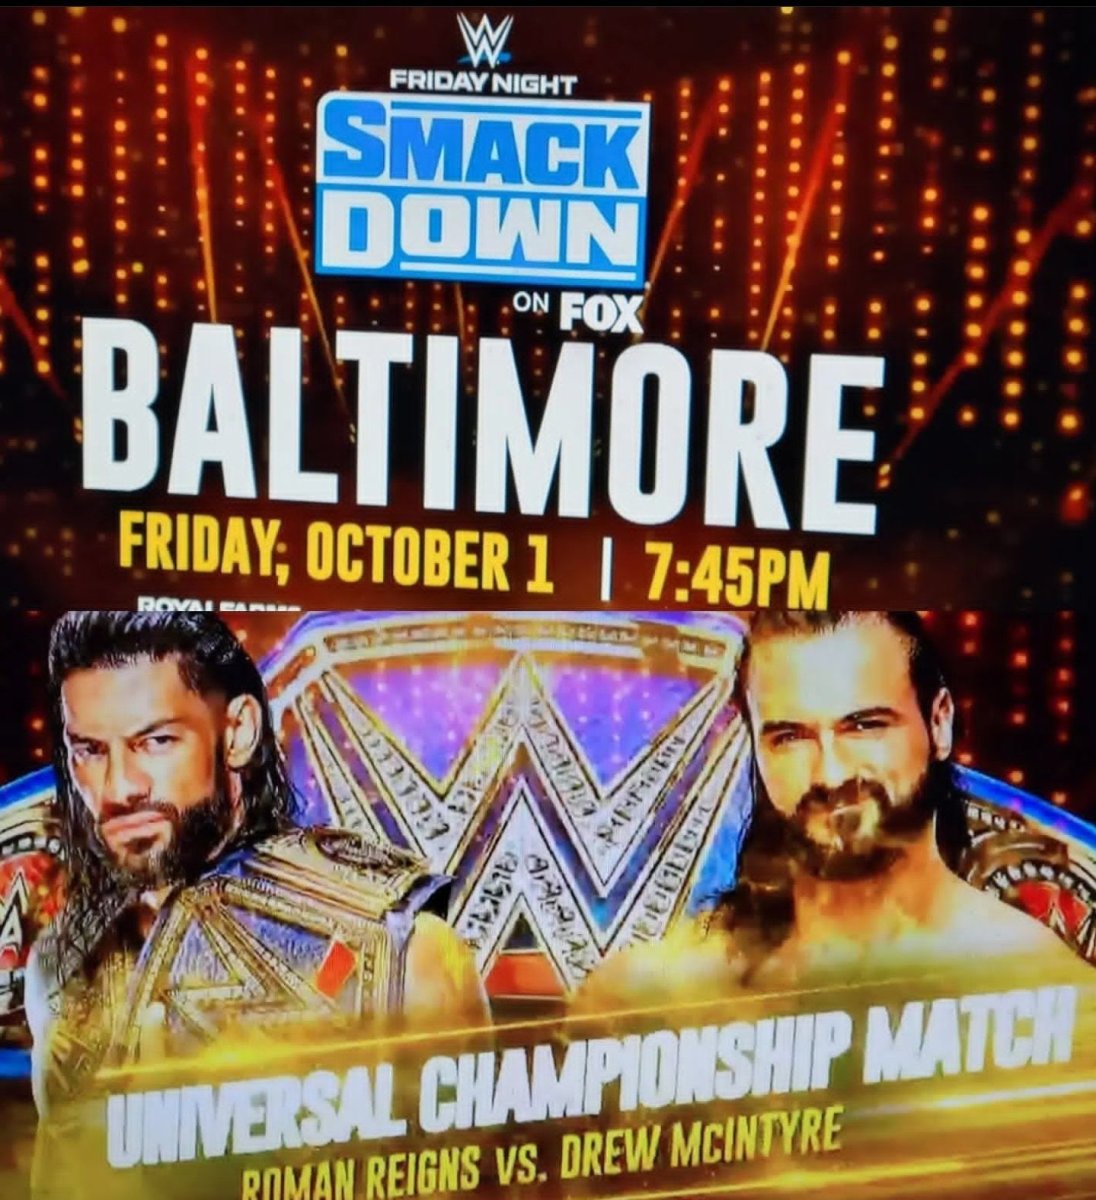 Local Ads In Baltimore Advertising Roman Reigns vs Drew McIntyre For